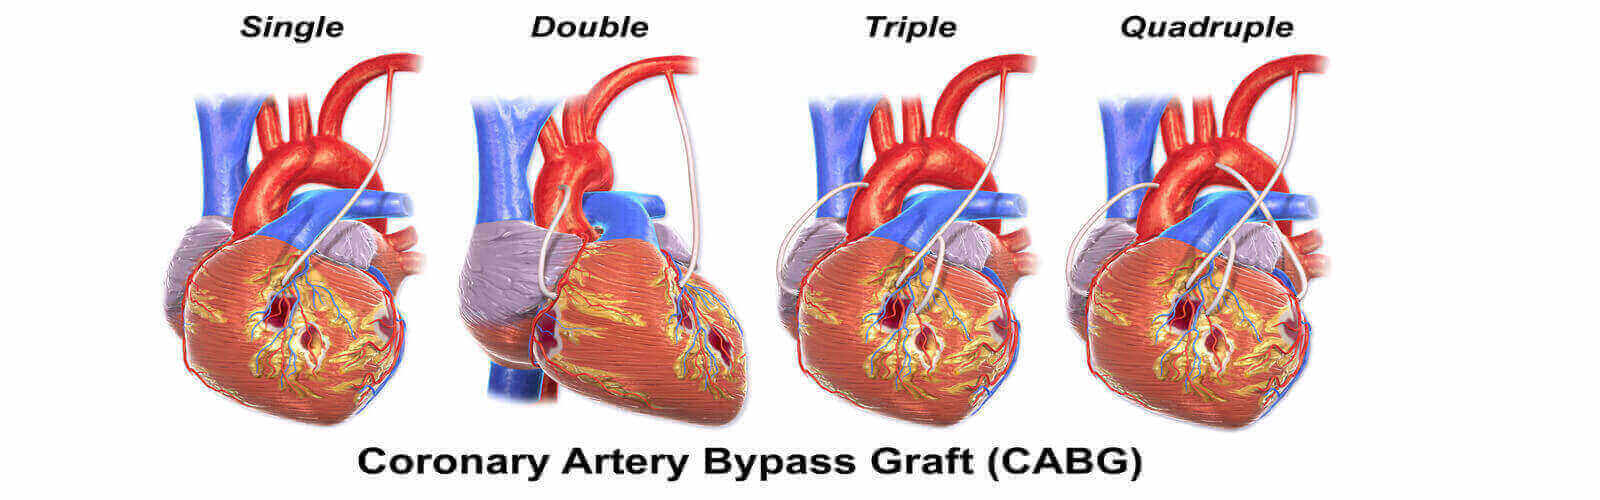 Coronary Artery Bypass Graft in United States